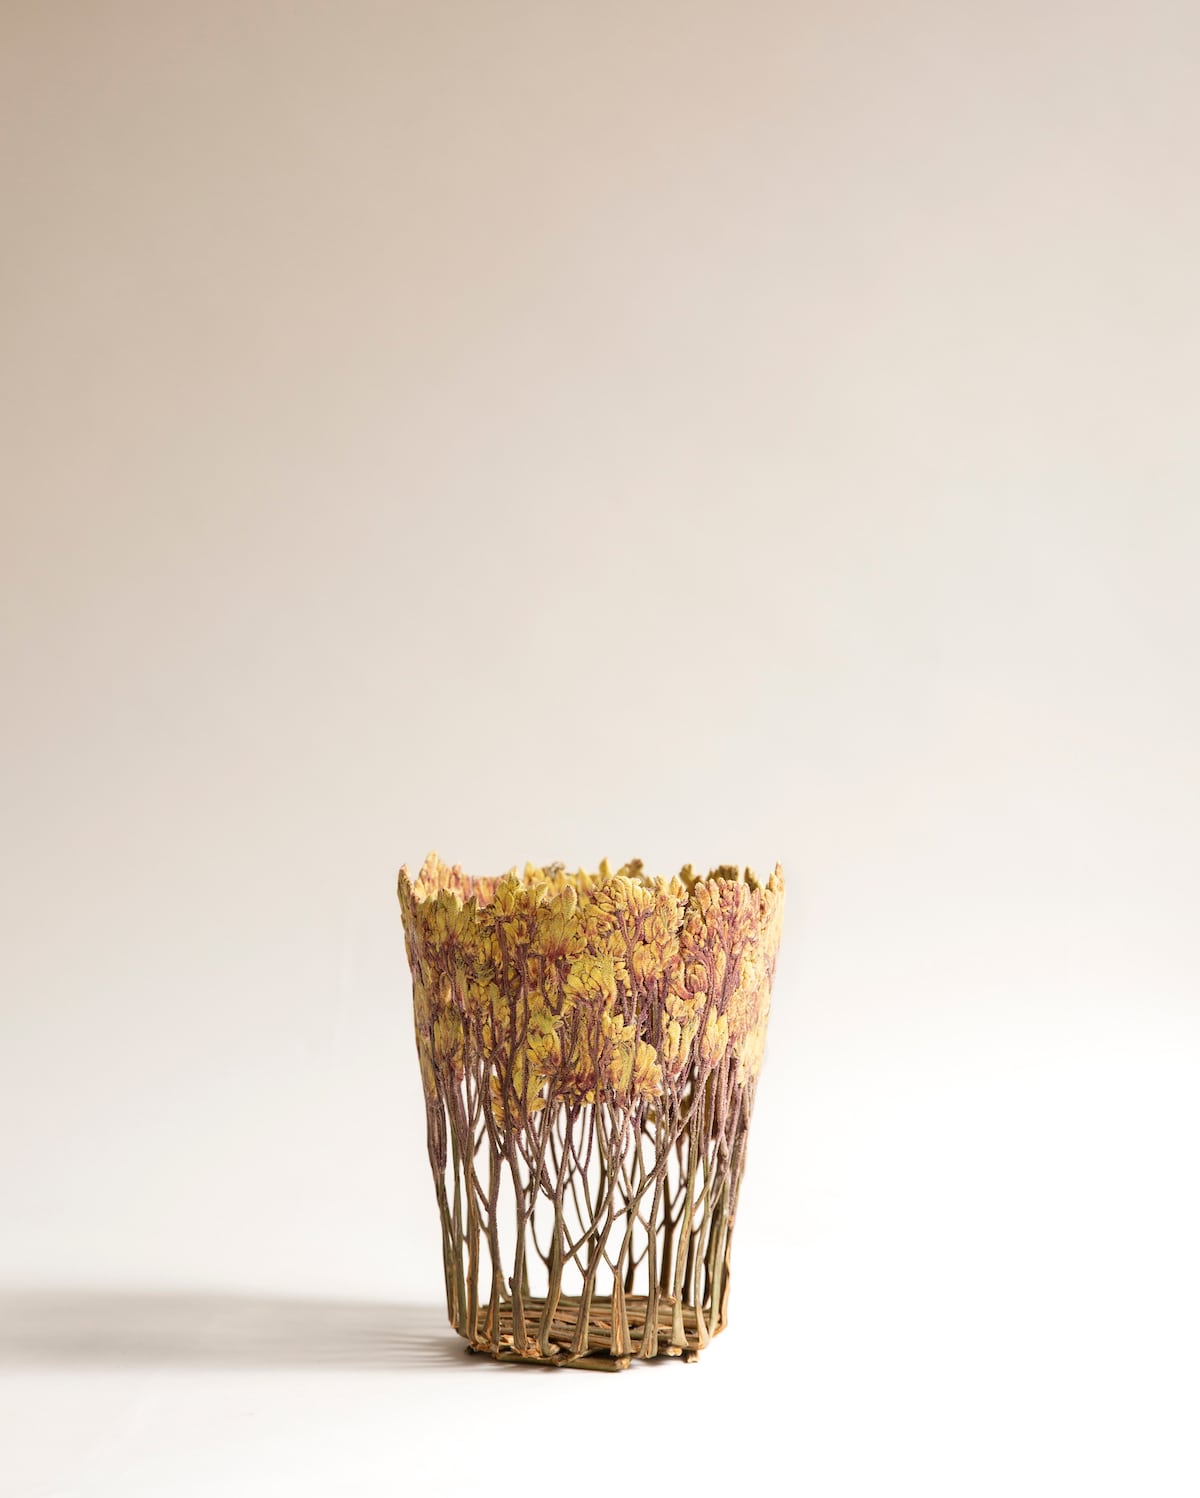 Dried Flower Sculptures by Shannon Clegg